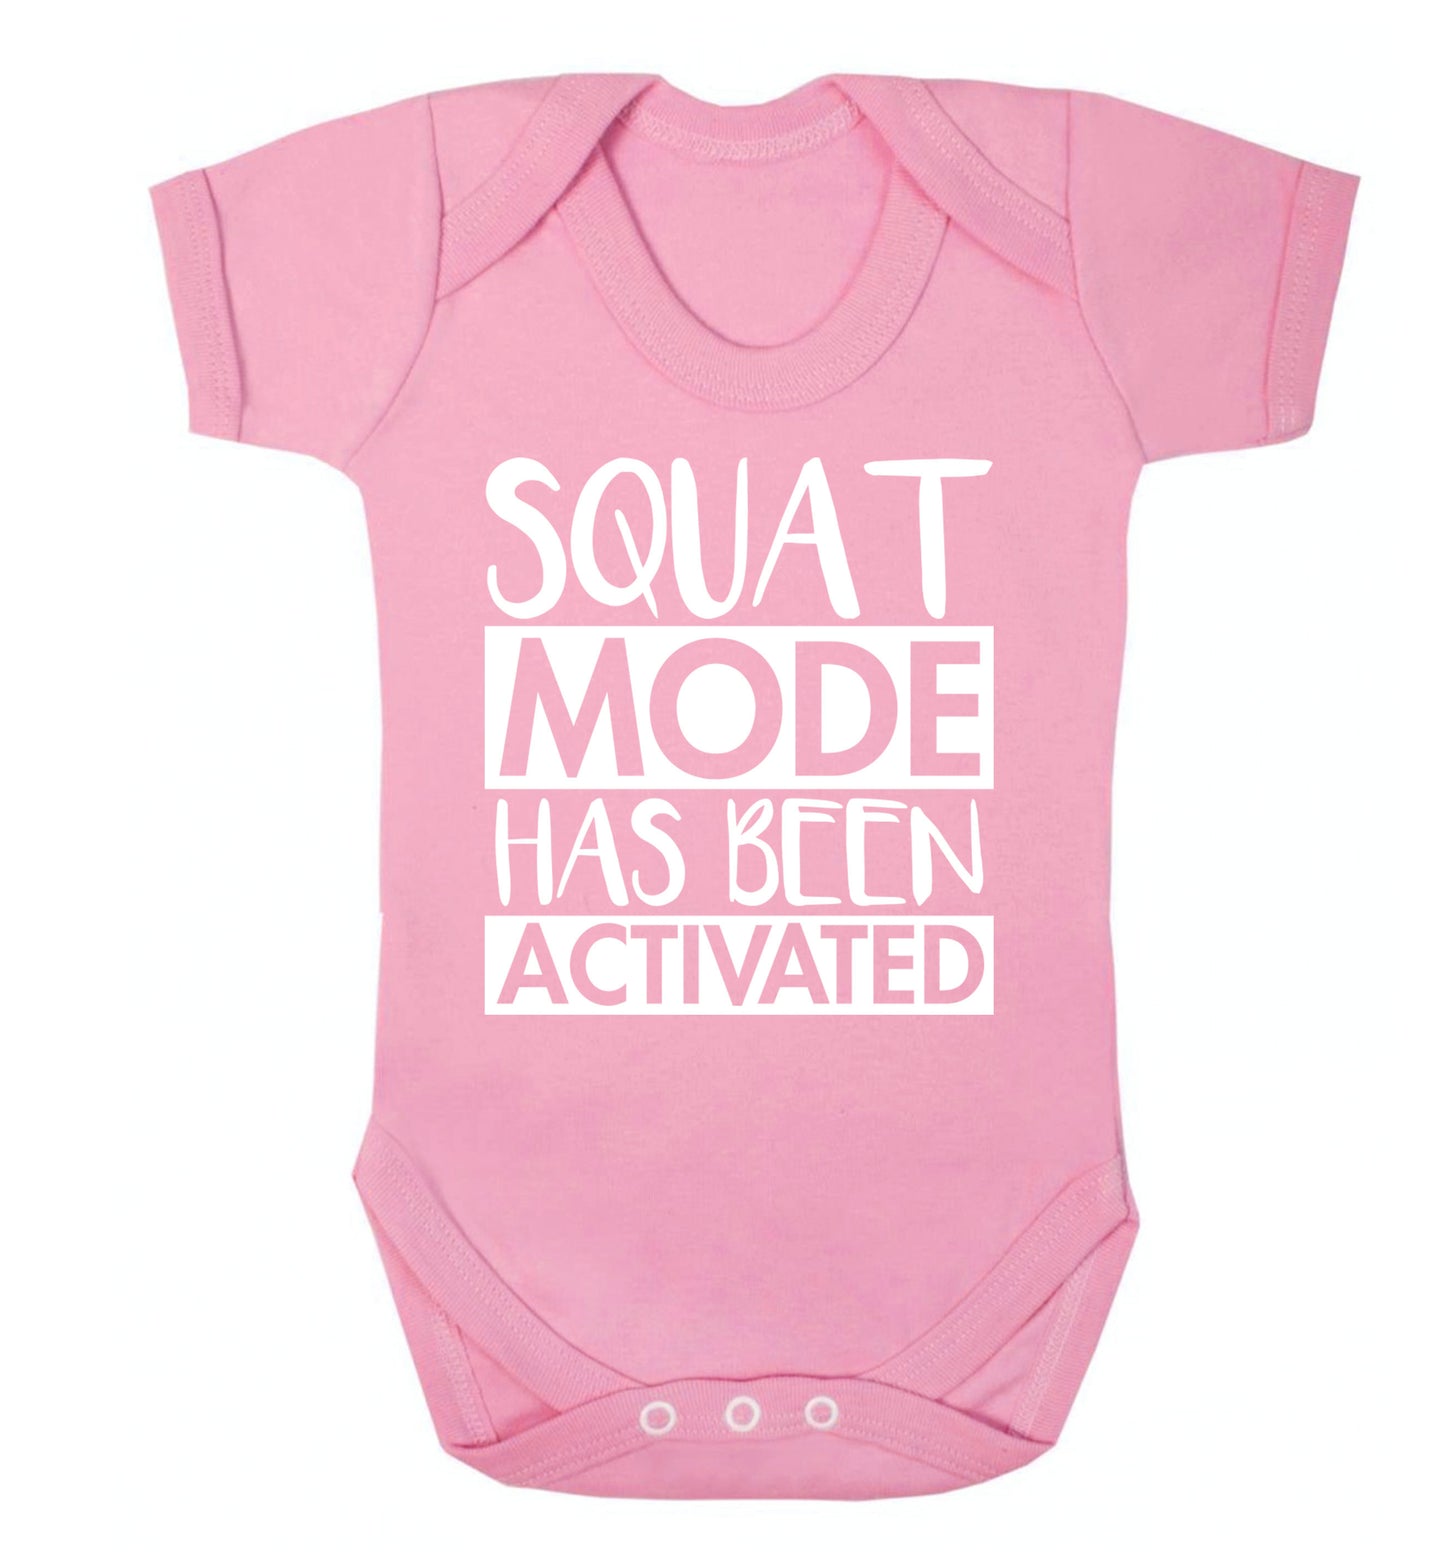 Squat mode activated Baby Vest pale pink 18-24 months